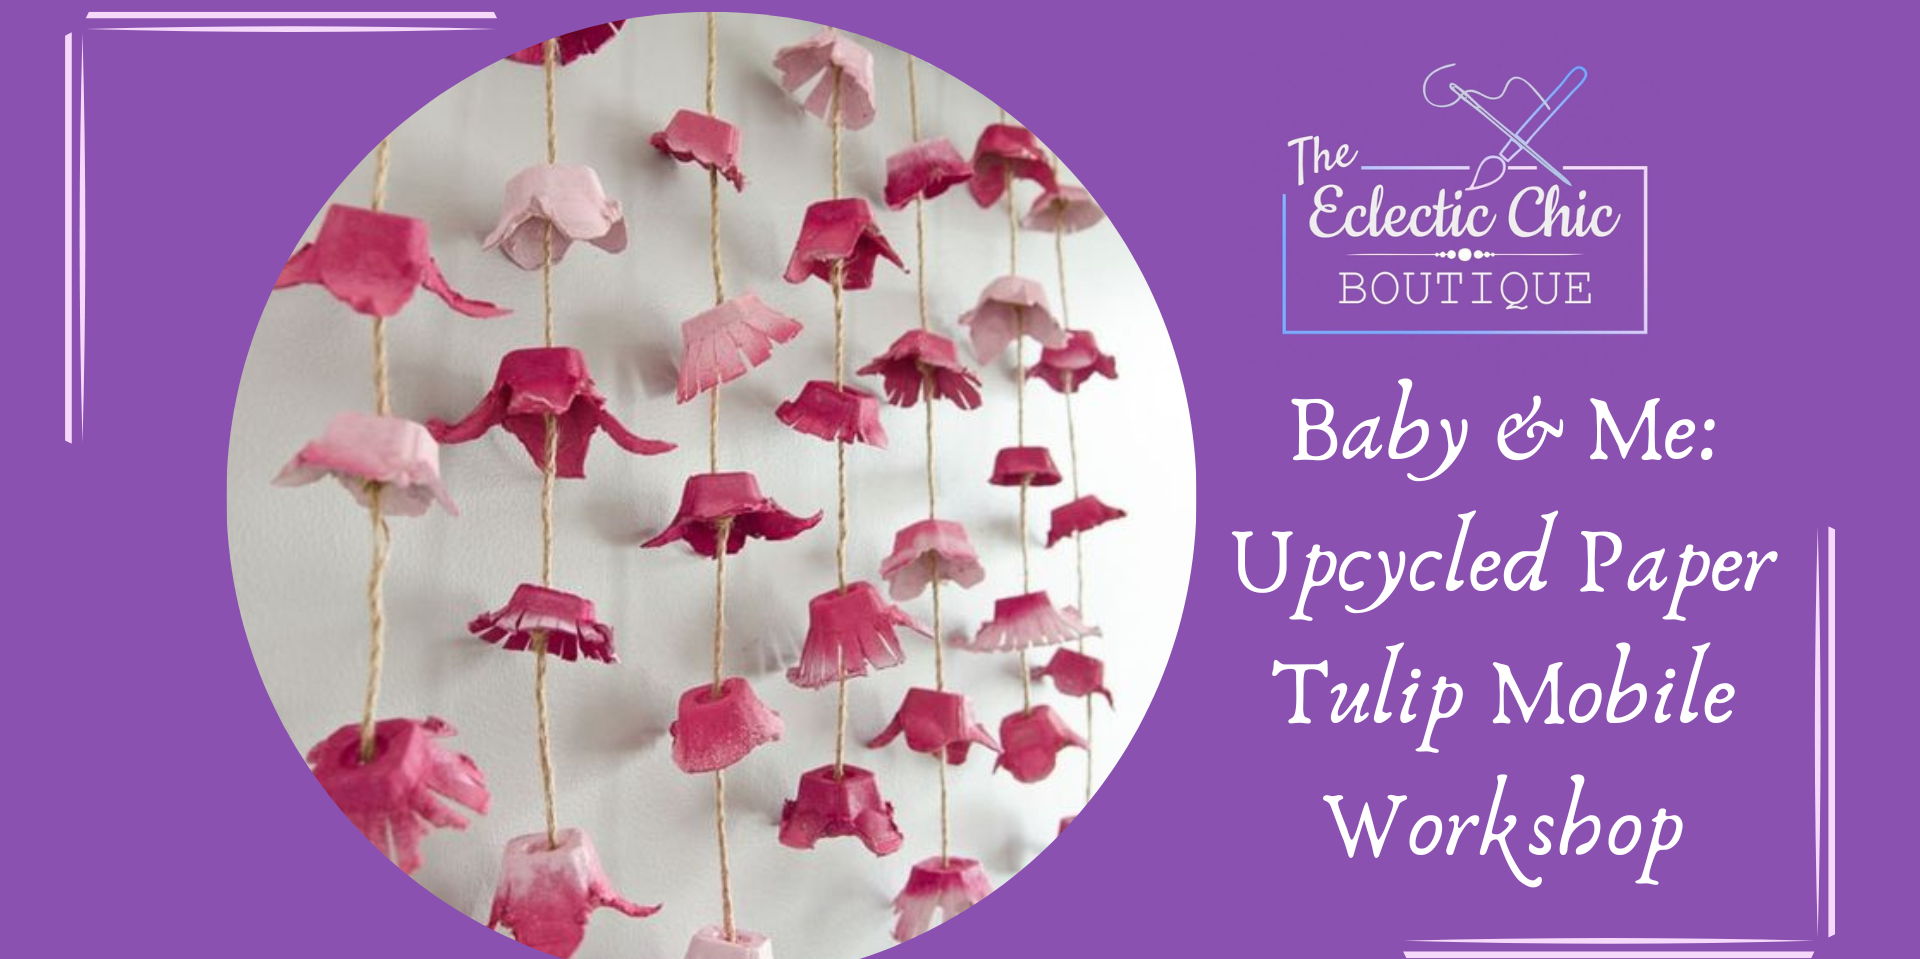 Baby & Me: Upcycled Paper Tulip Mobile Workshop promotional image